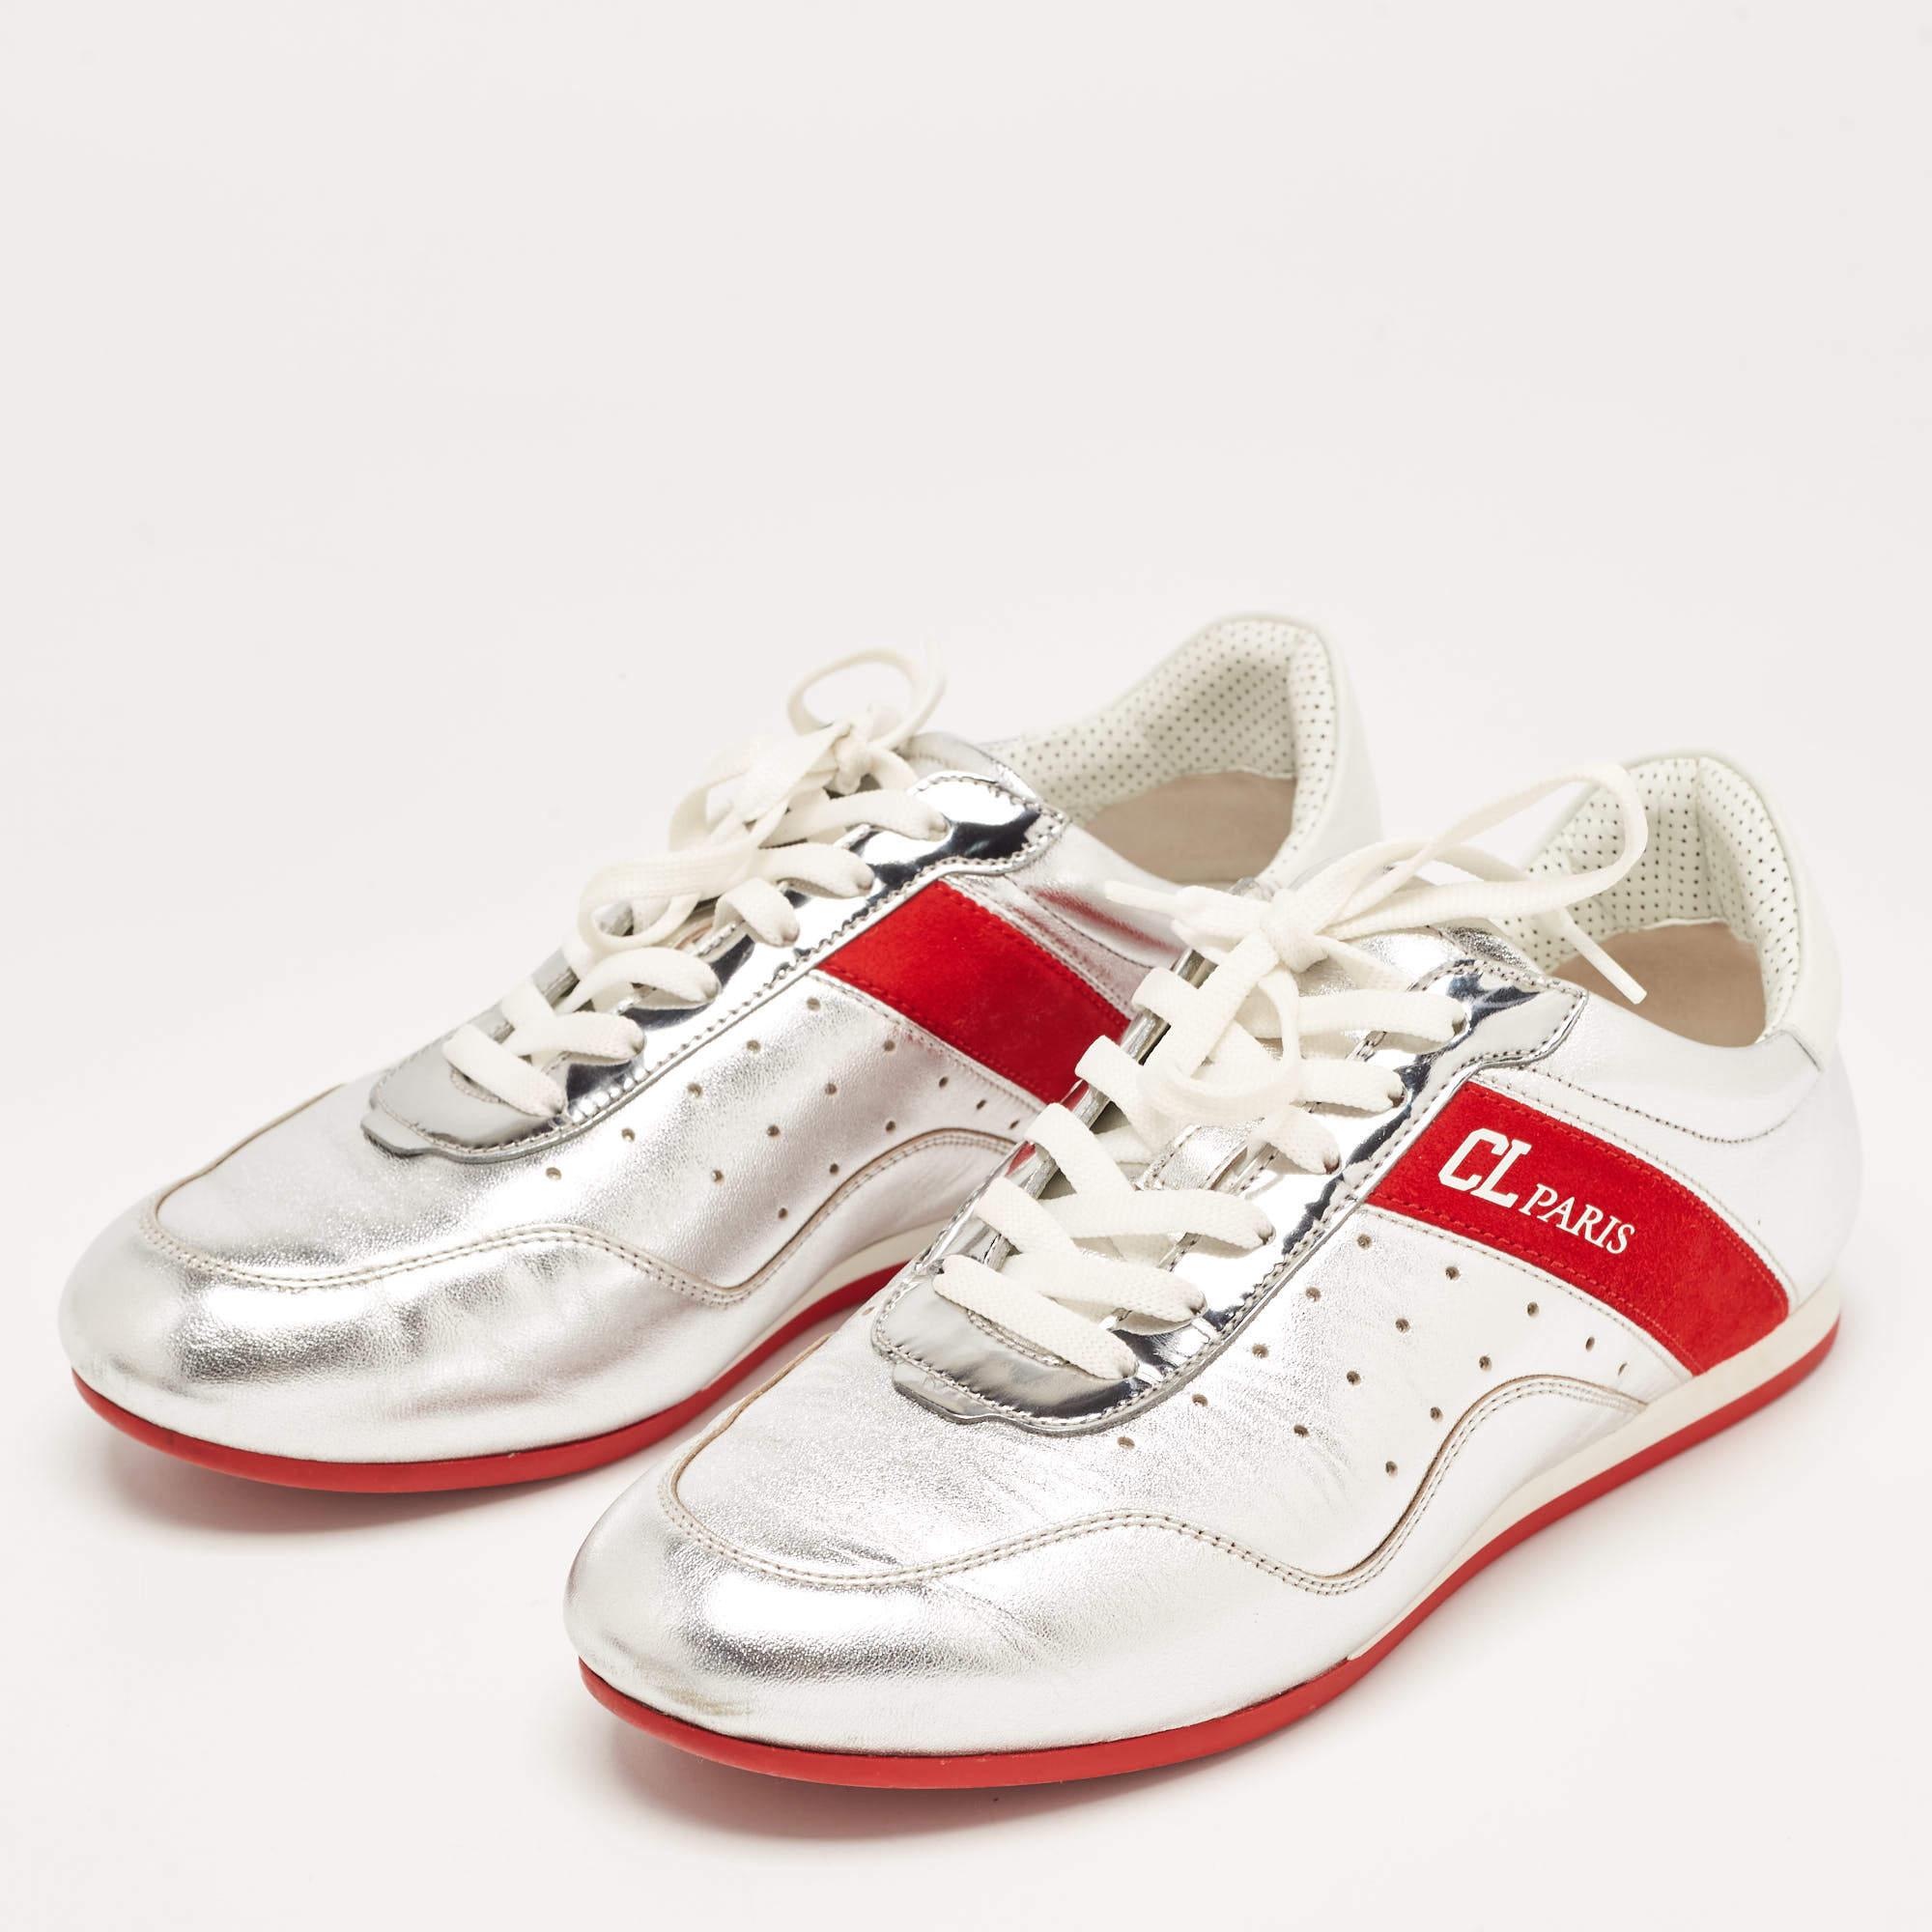 Christian Louboutin Silver/Red Leather and Suede My K Low Sneakers Size 36.5 For Sale 1